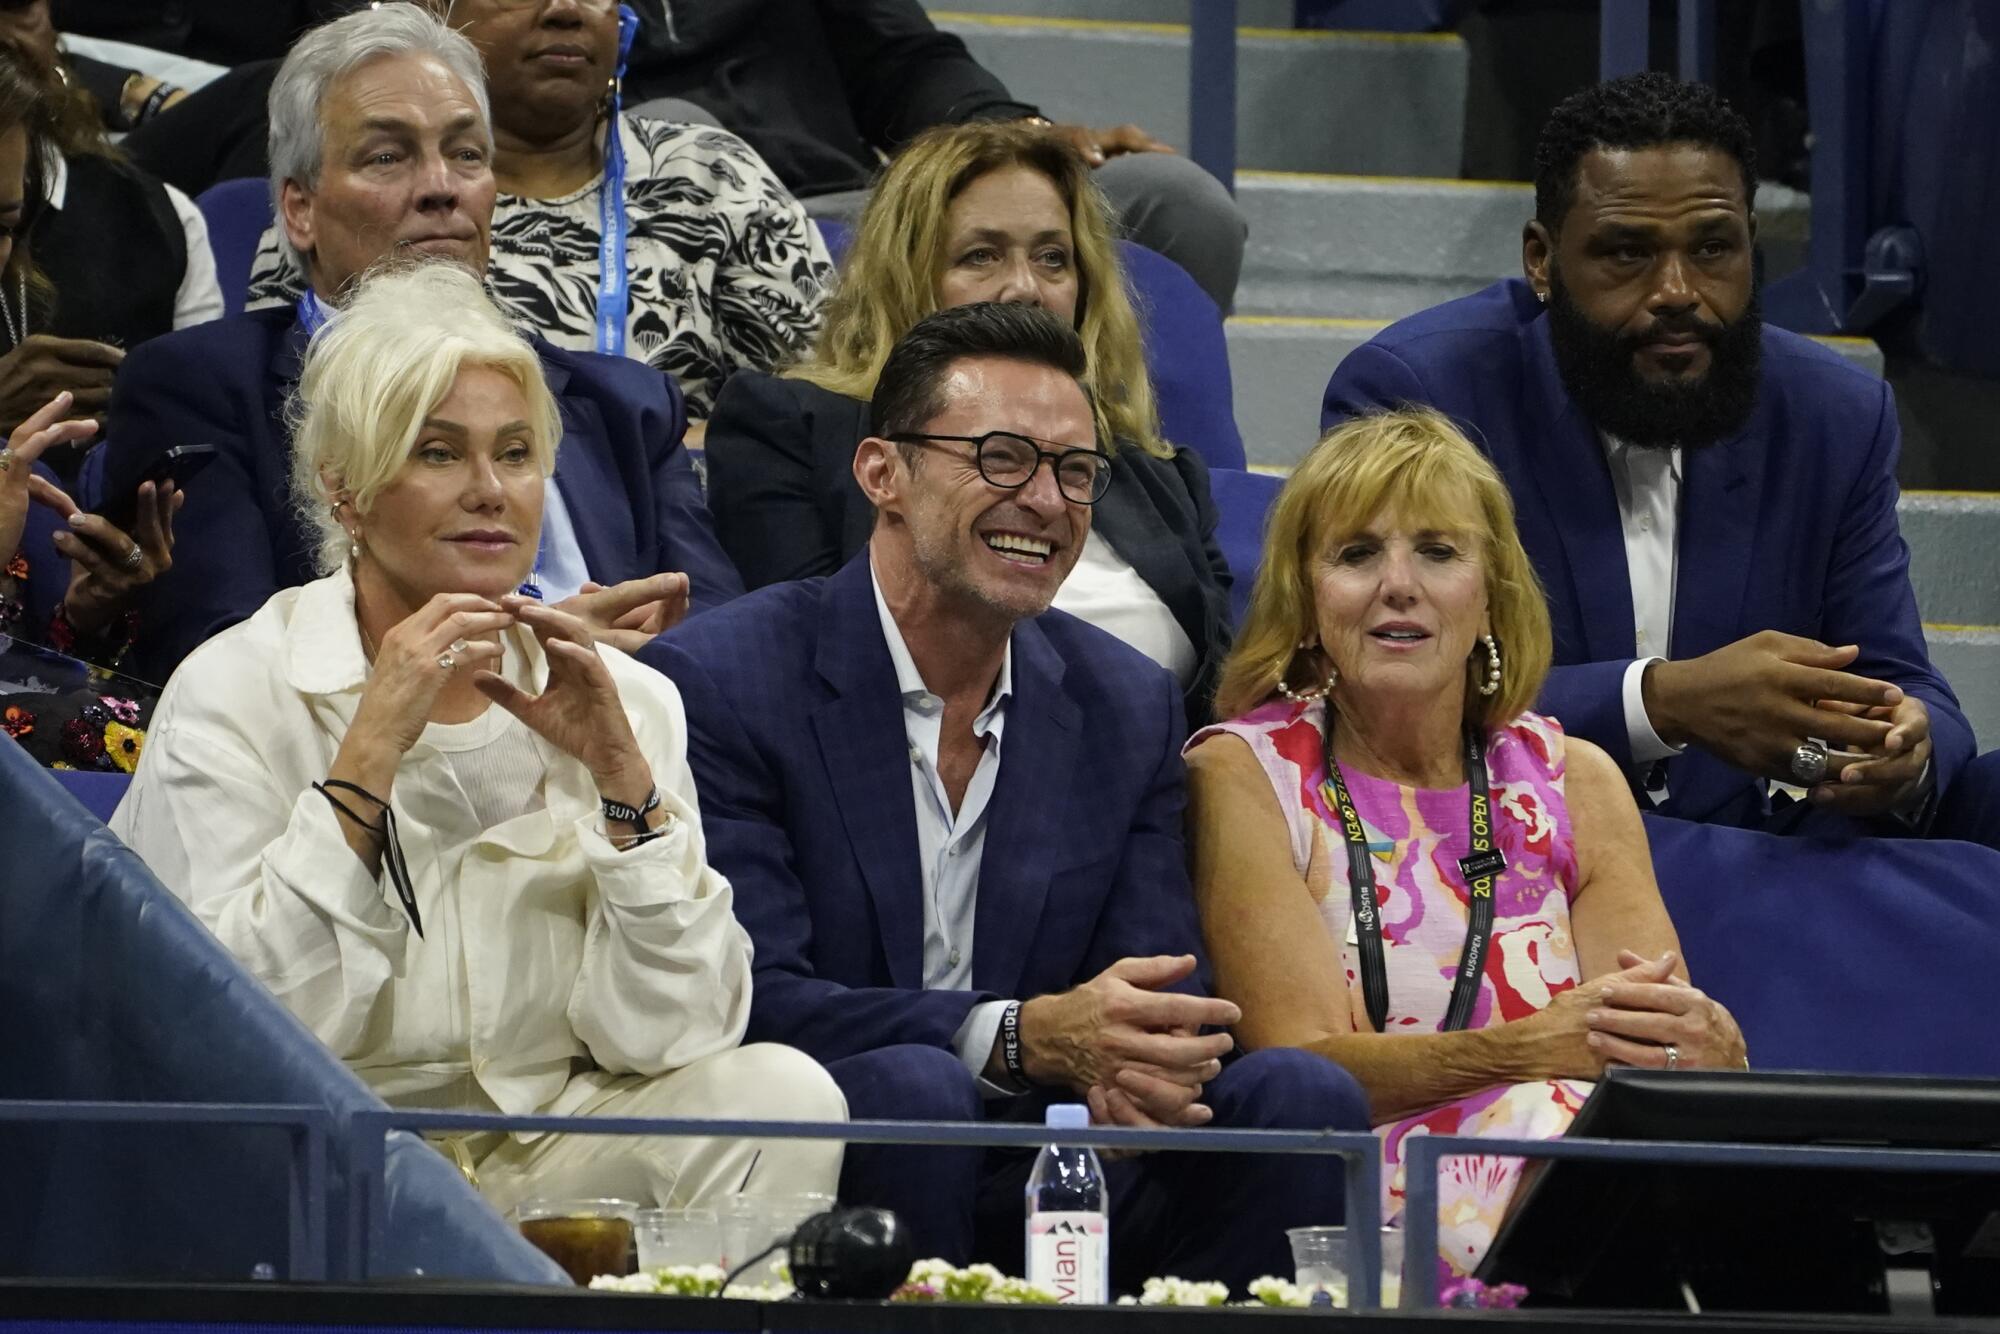 Hugh Jackman watches Serena Williams and Danka Kovinic during the first round of the U.S. Open.